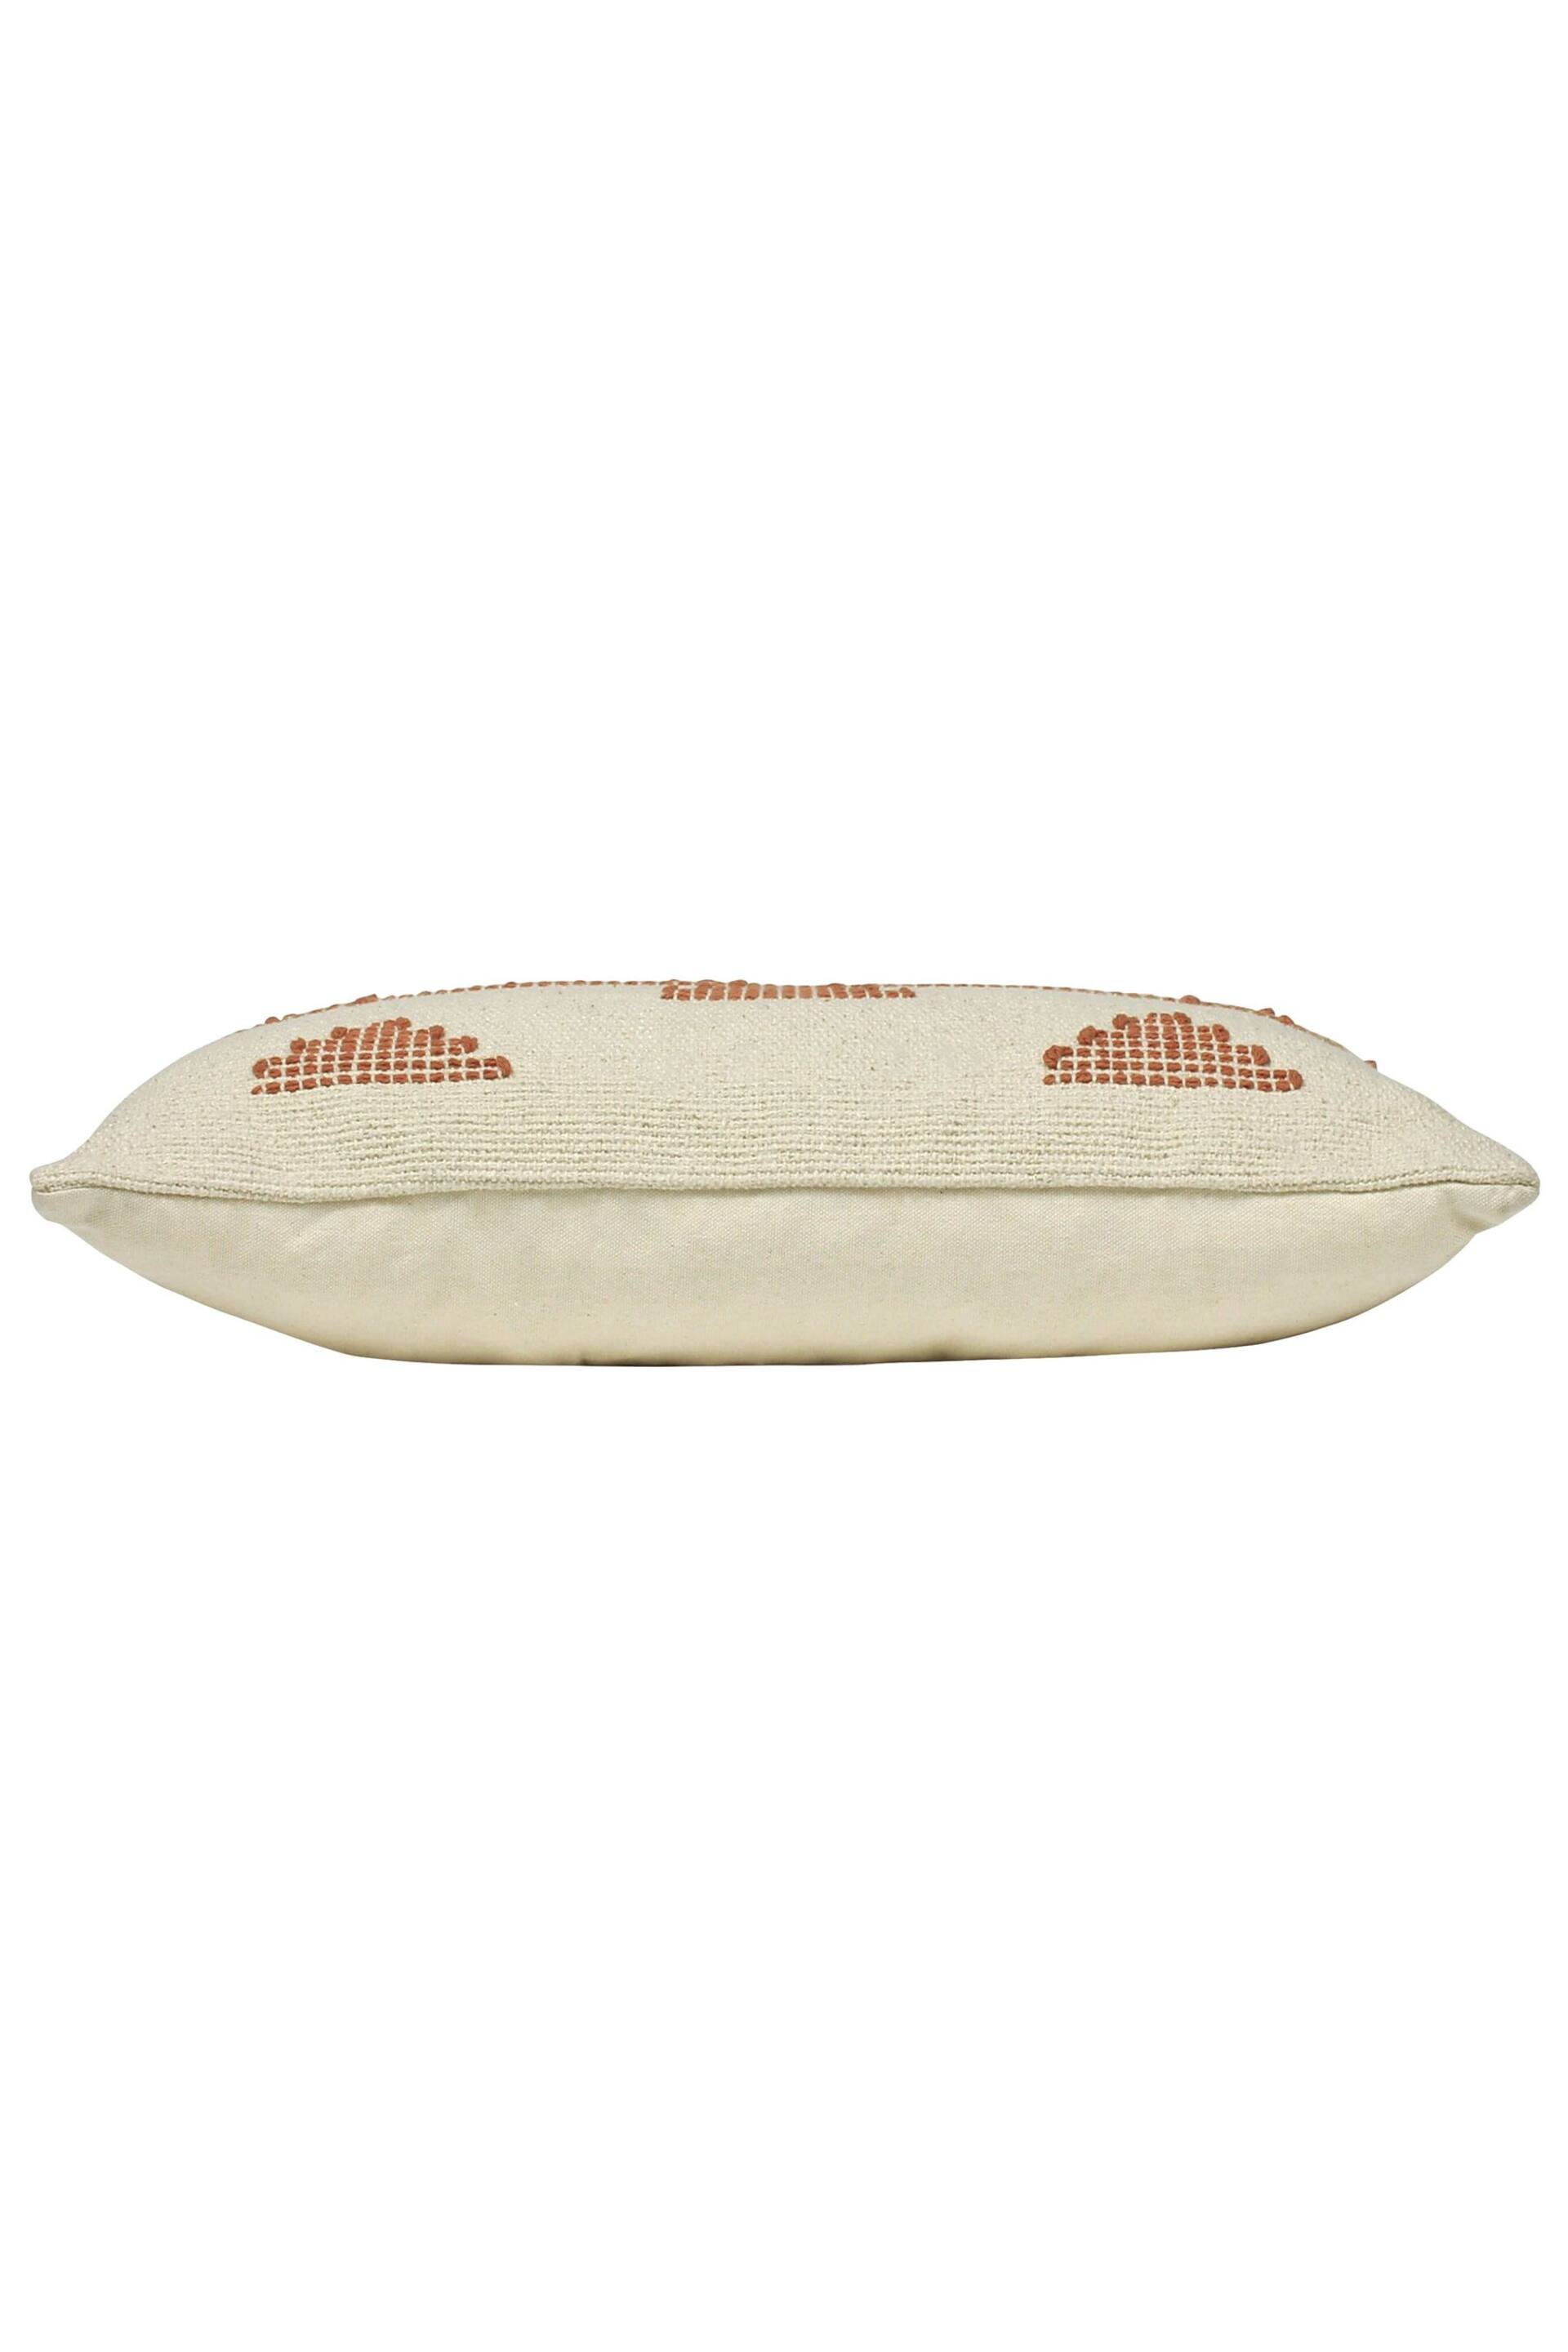 furn. Brick Red Sonny Stitched Polyester Filled Cushion - Image 3 of 3